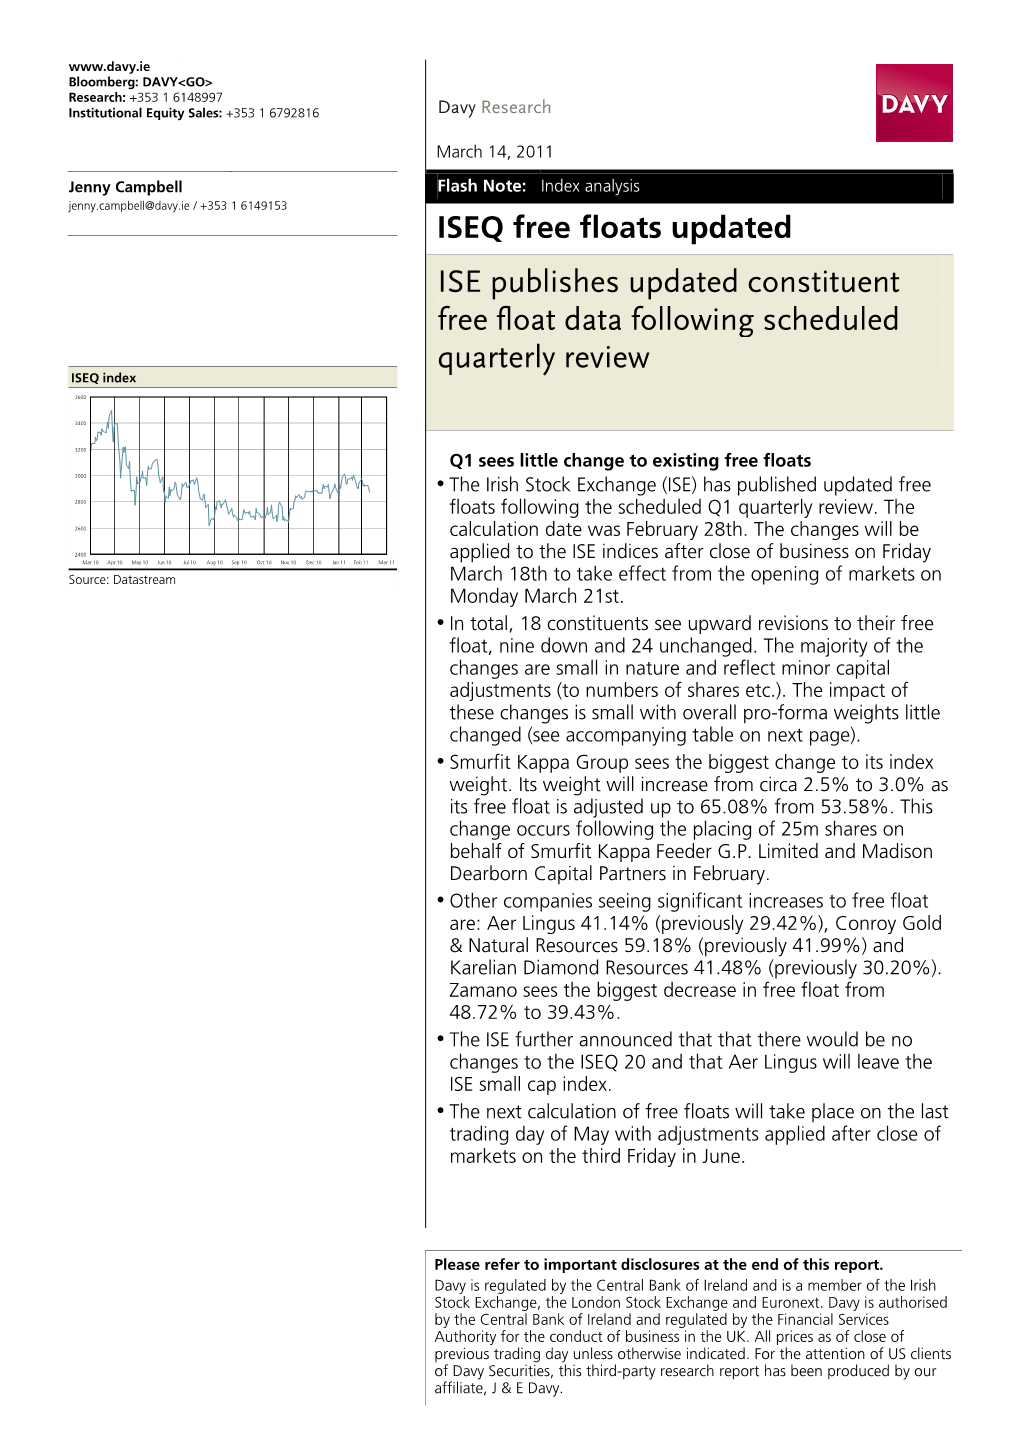 ISE Publishes Updated Constituent Free Float Data Following Scheduled Quarterly Review ISEQ Index